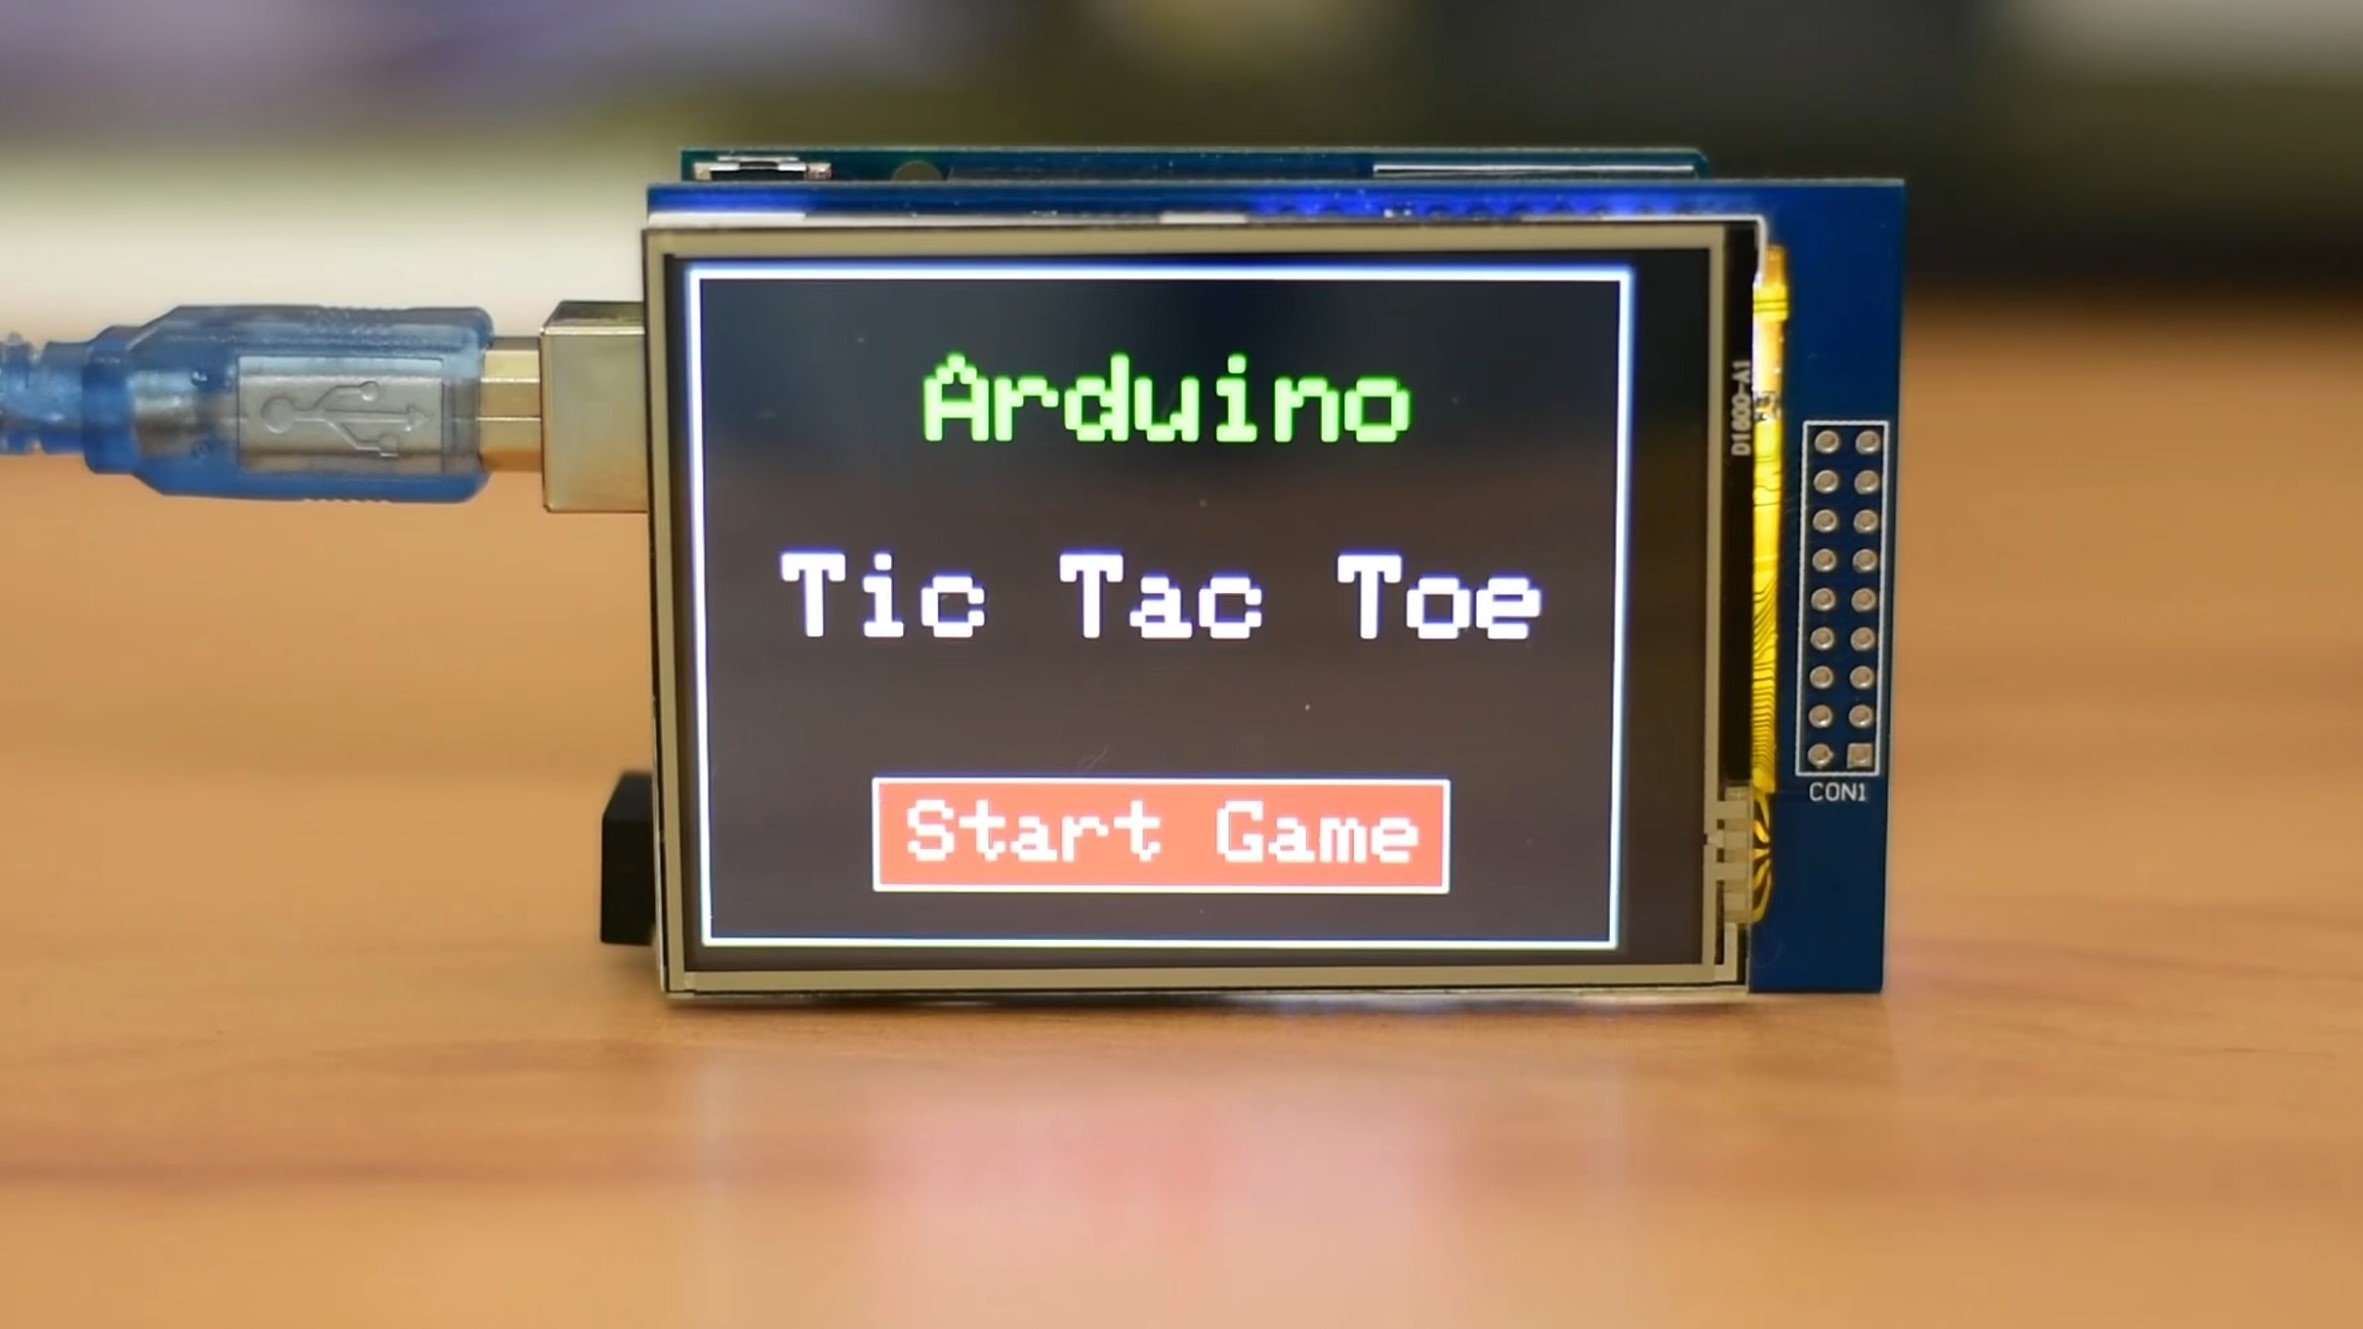 Which Arduino Is Best for Your Project